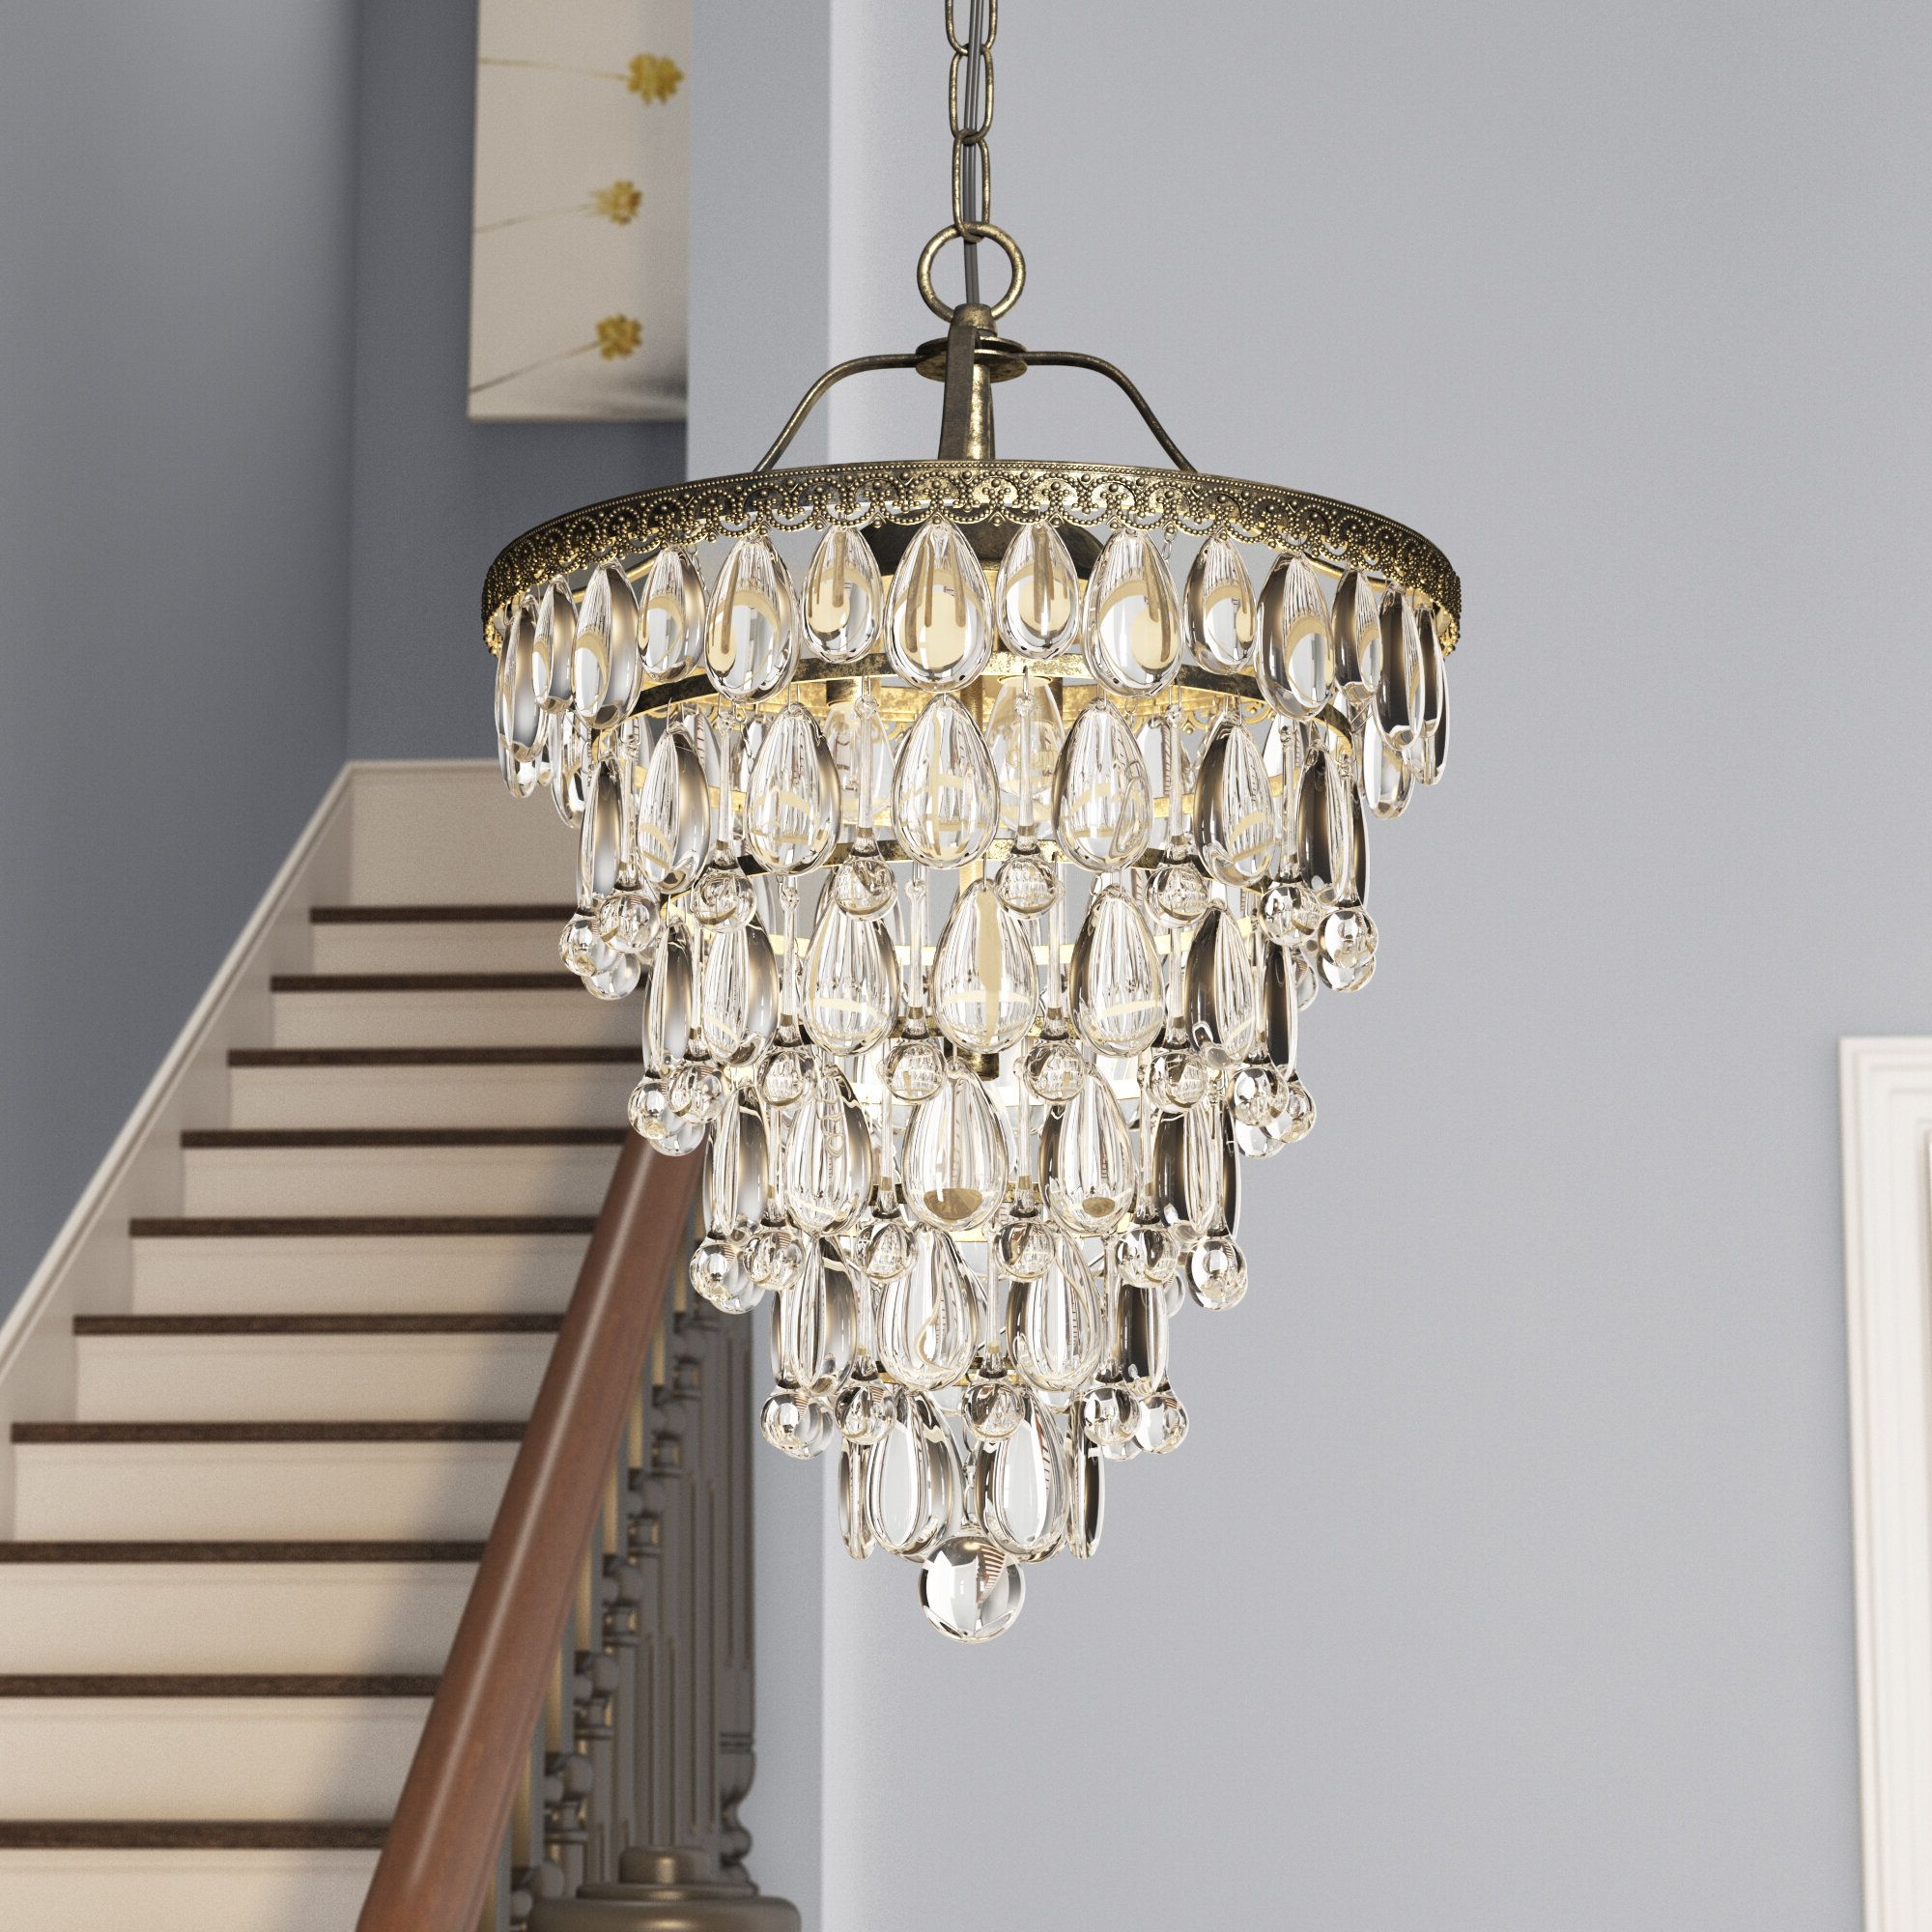 Bramers 6 Light Novelty Chandeliers Pertaining To Fashionable Totnes 4 Light Crystal Chandelier (View 4 of 25)